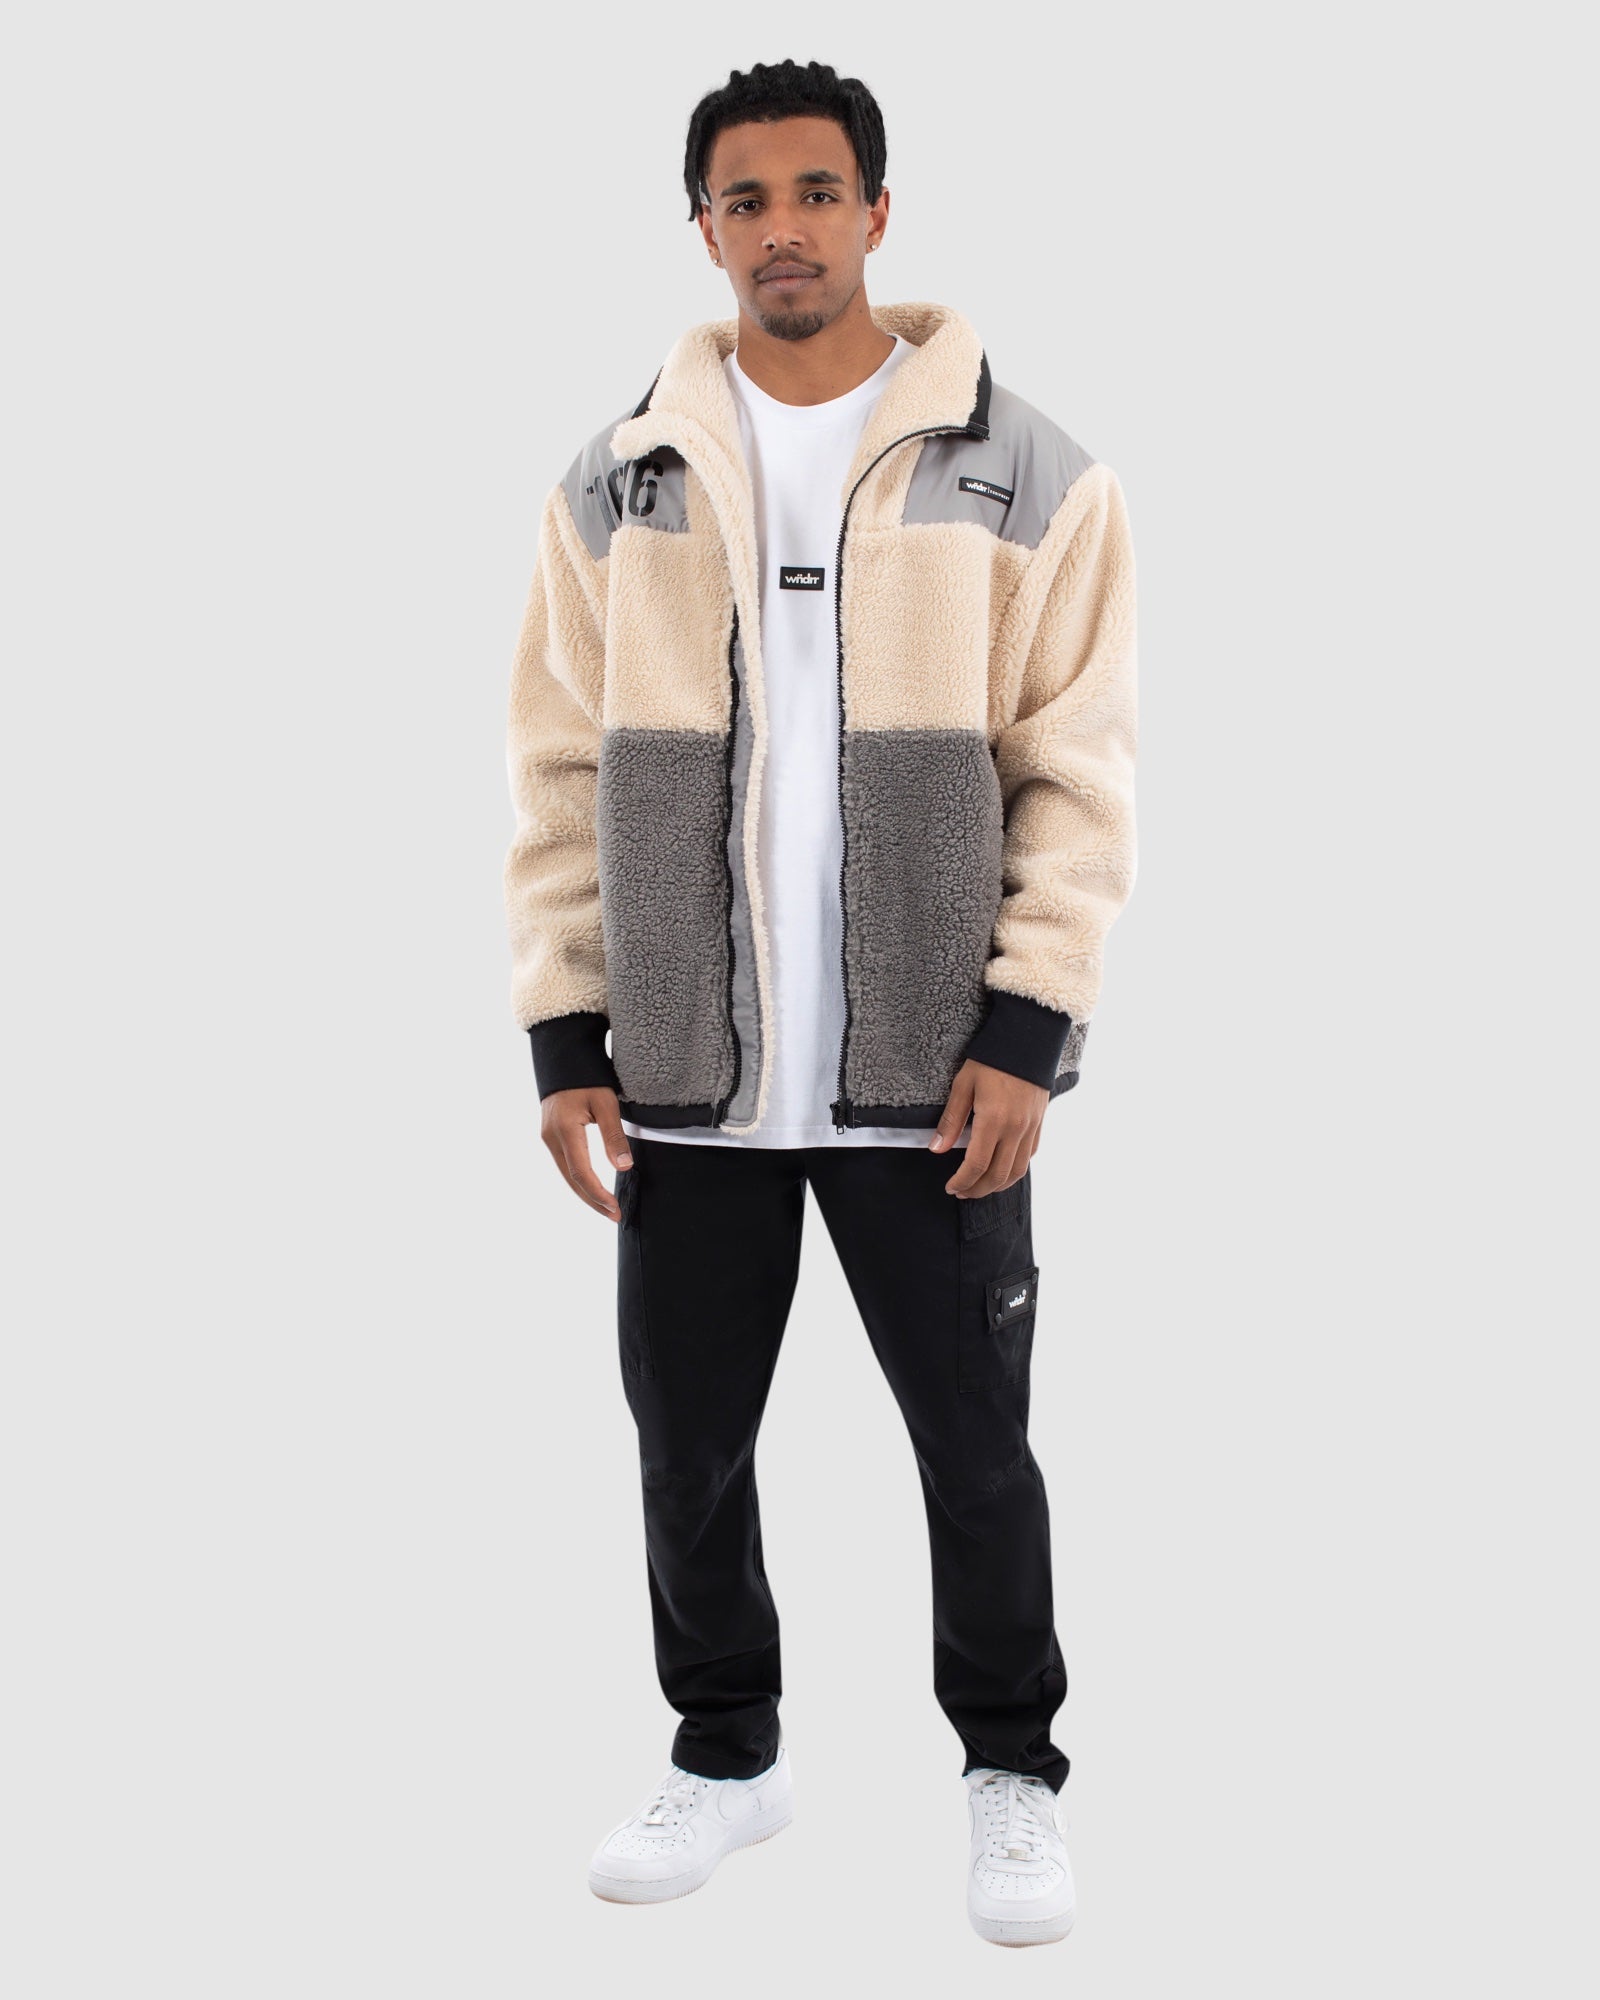 COUNT IT SHERPA JACKET - GREY/OFF WHITE